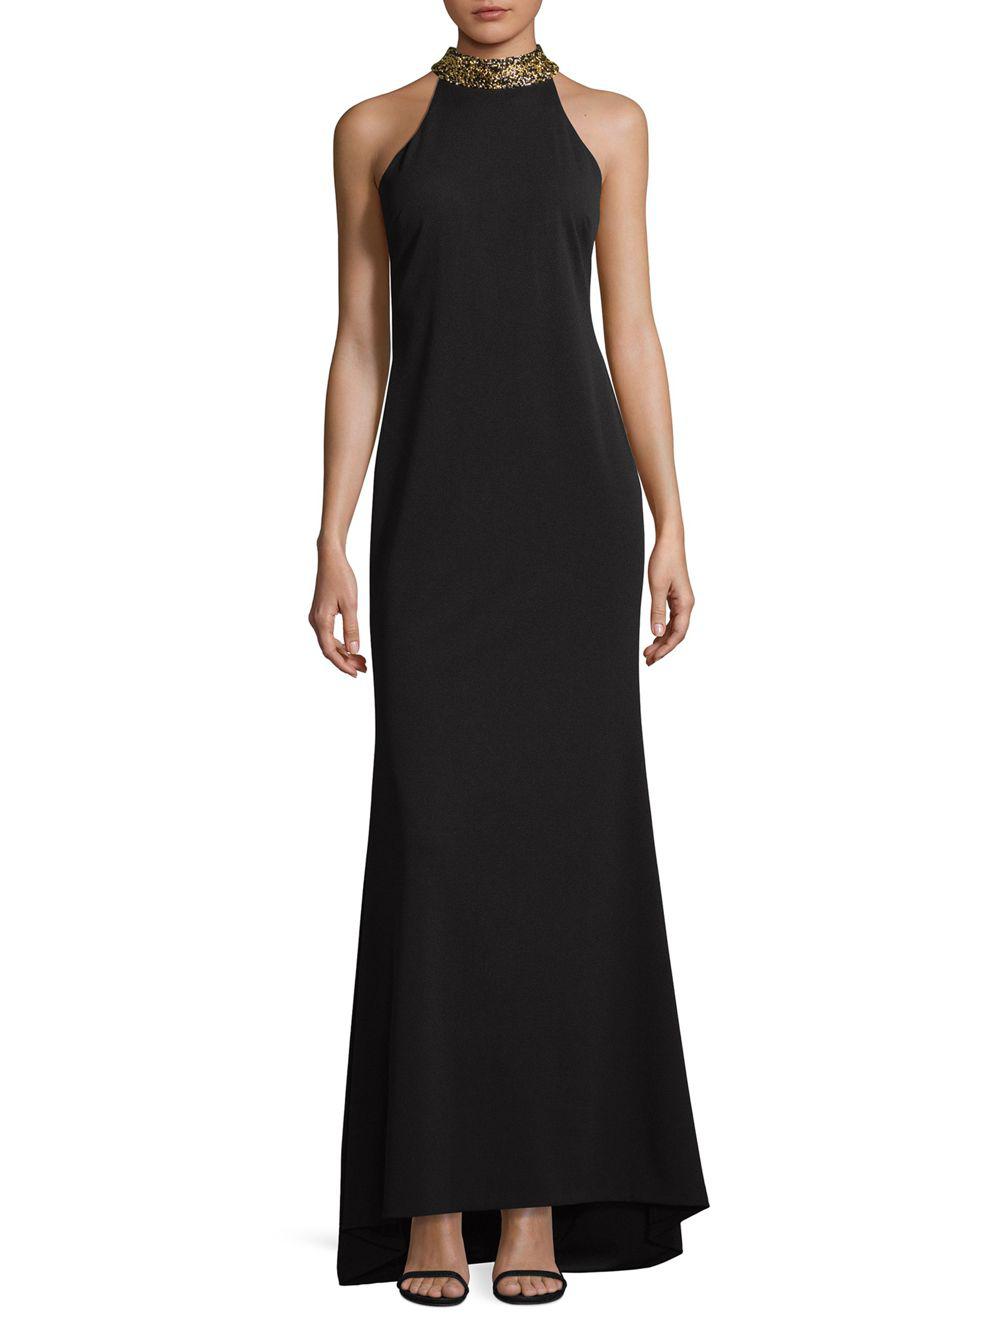 Choker Evening Gown in Black 